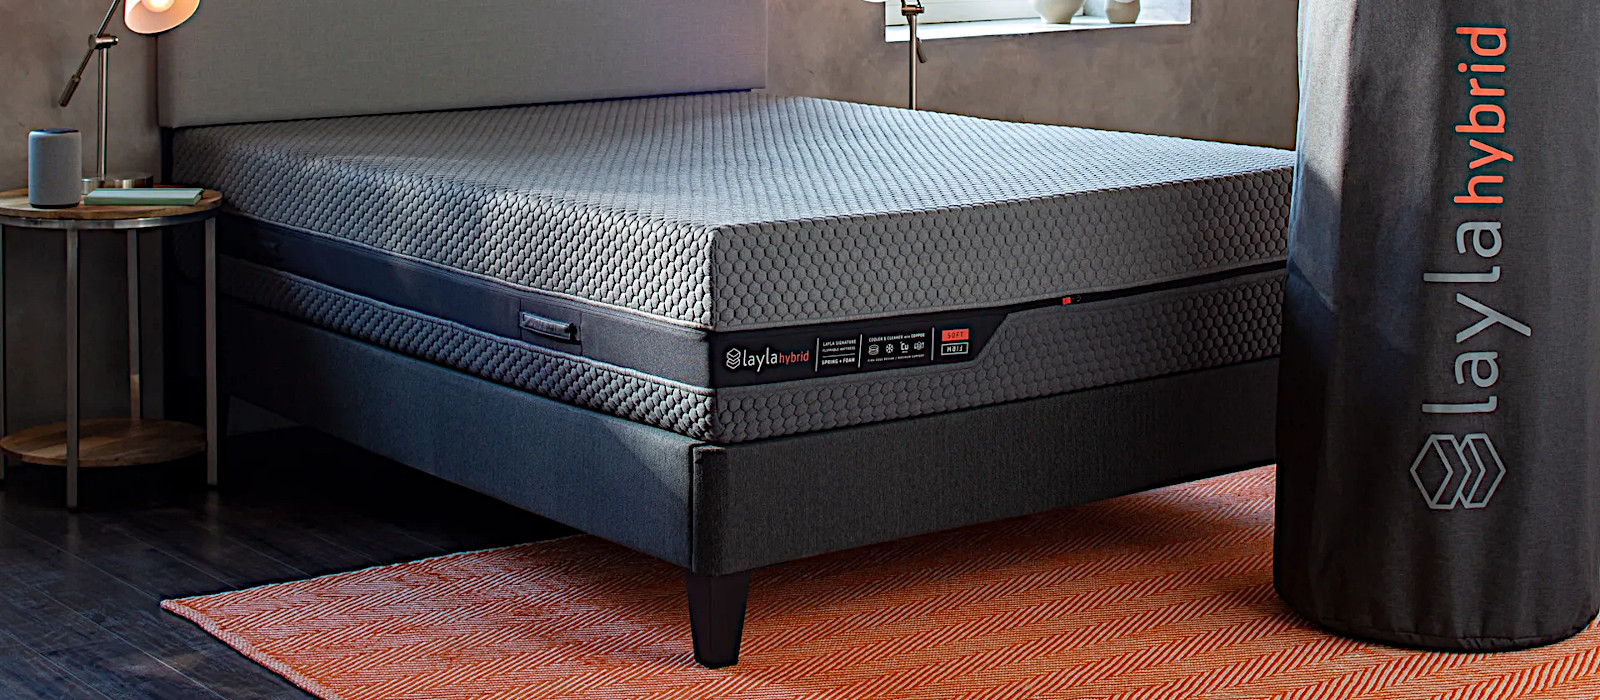 Deal copper infused flippable hybrid mattress